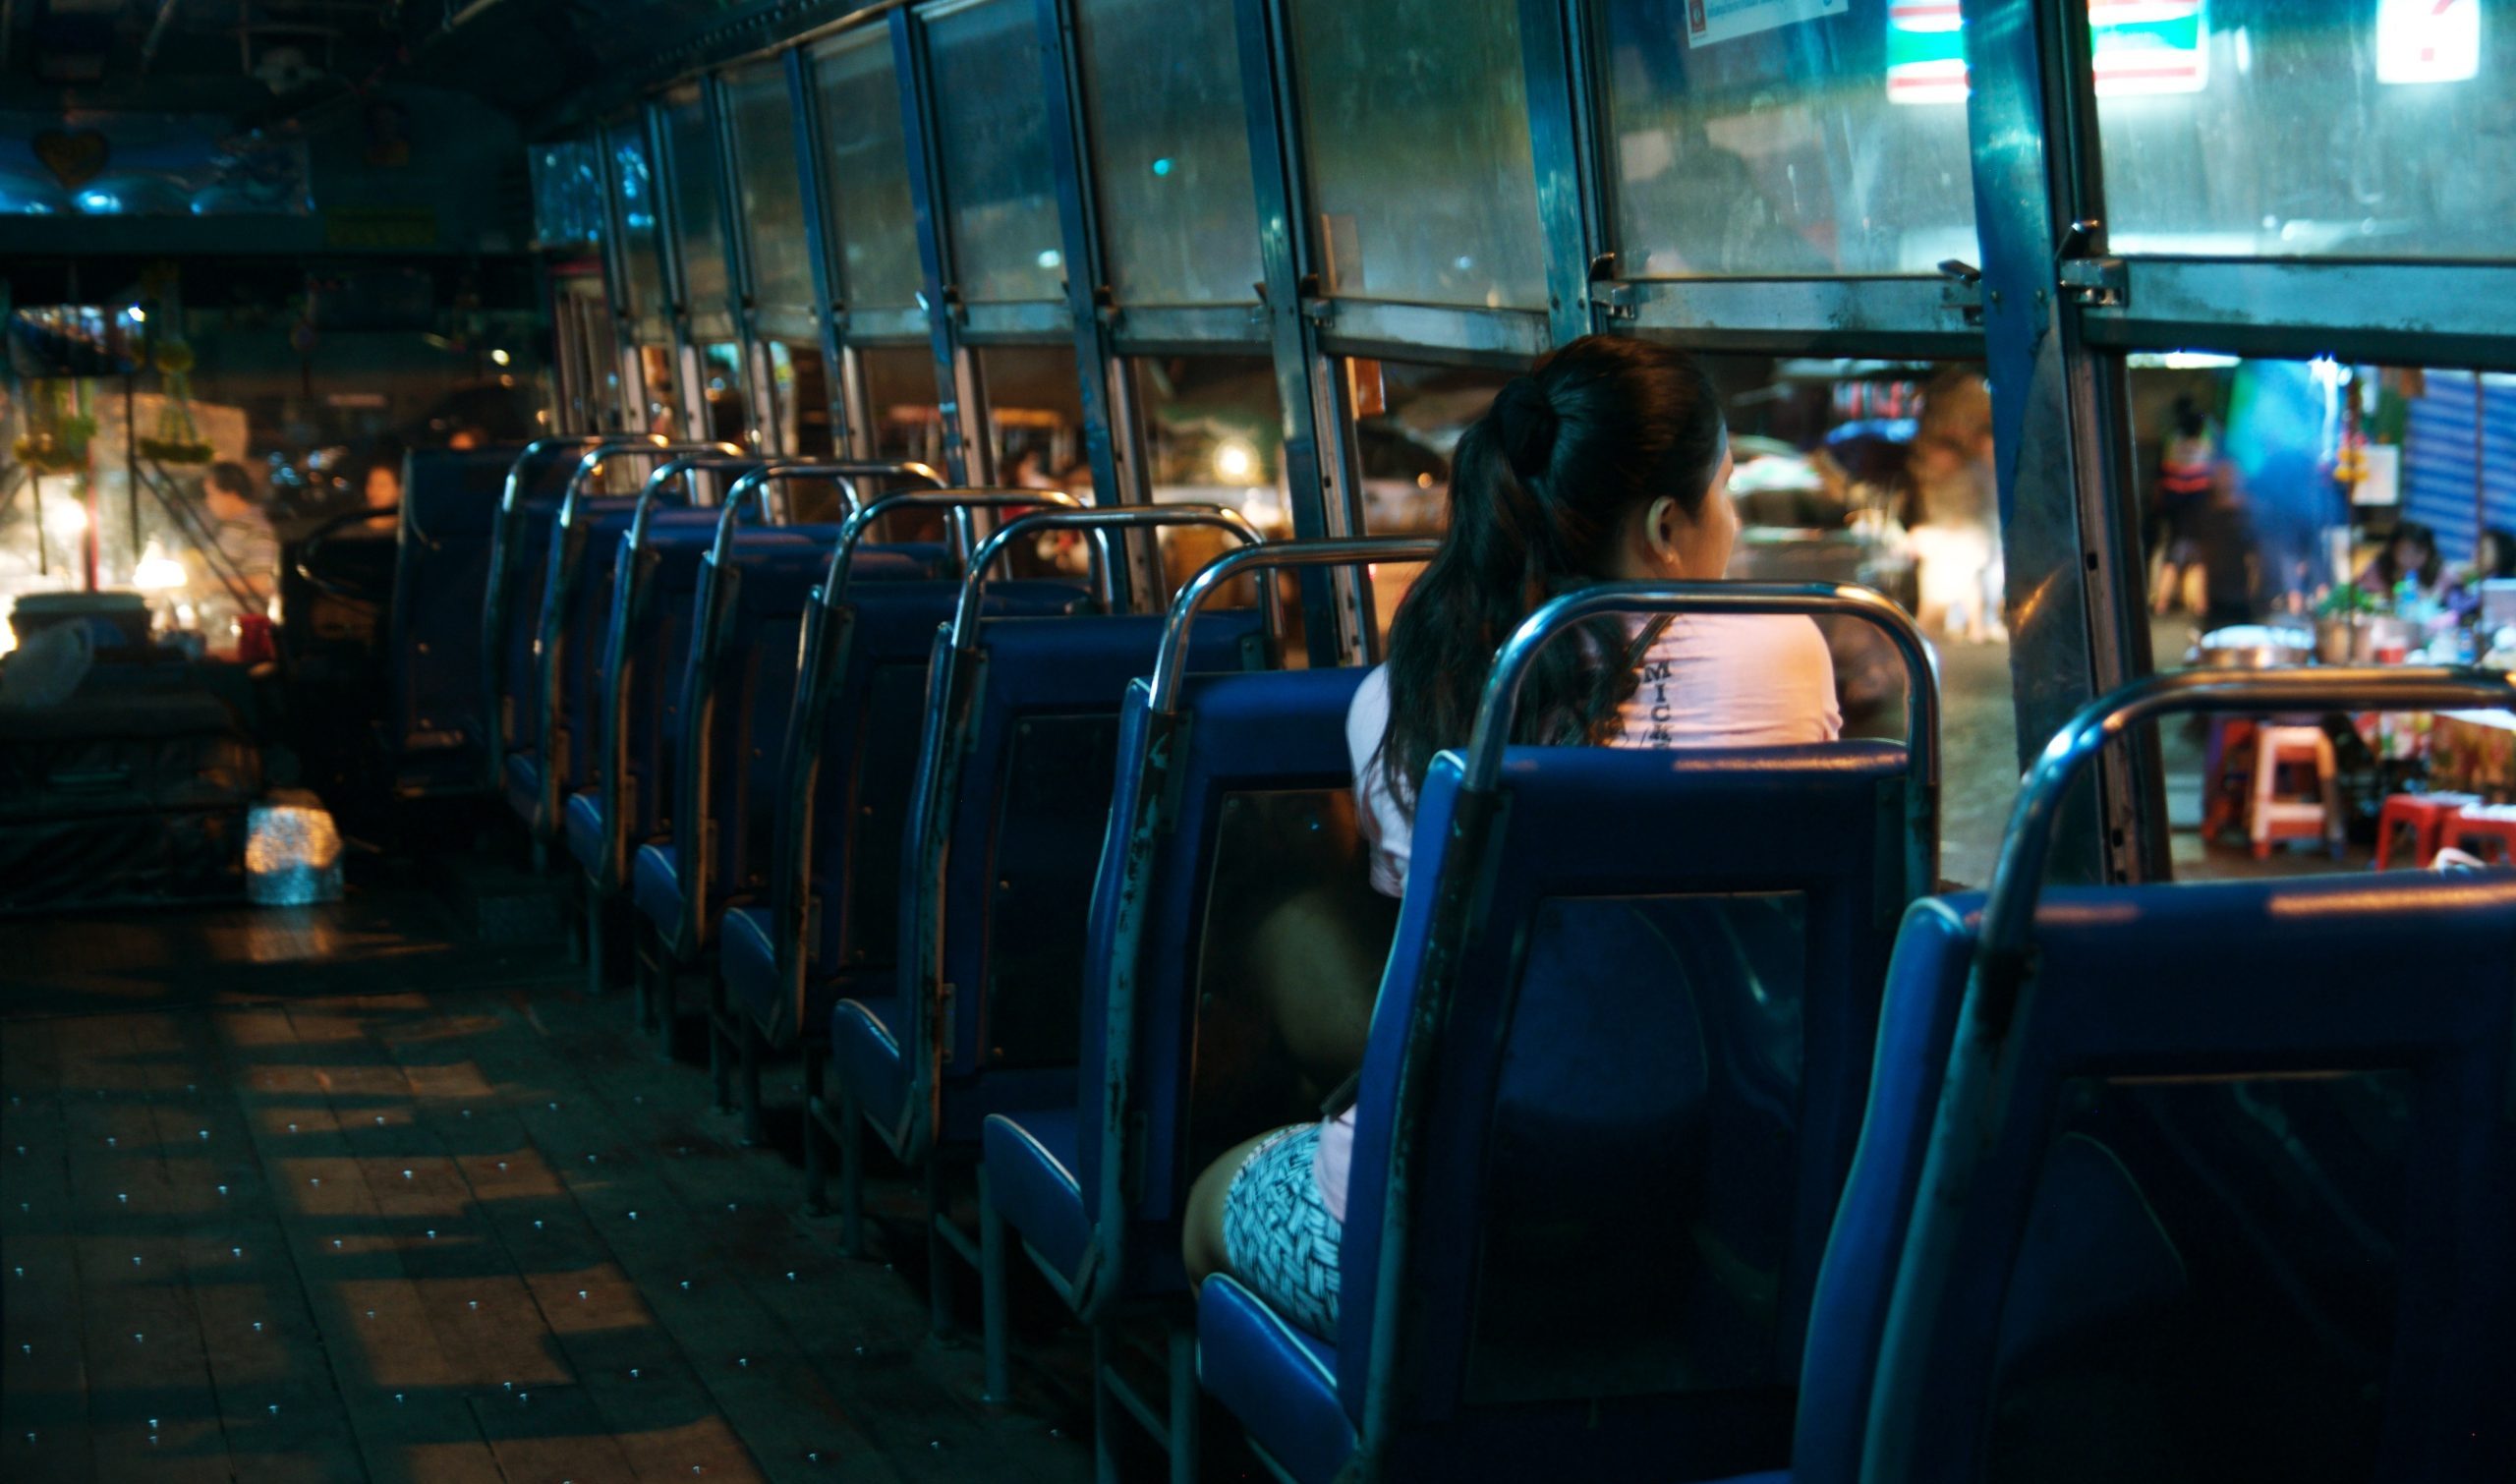 A woman rides a bus alone at night